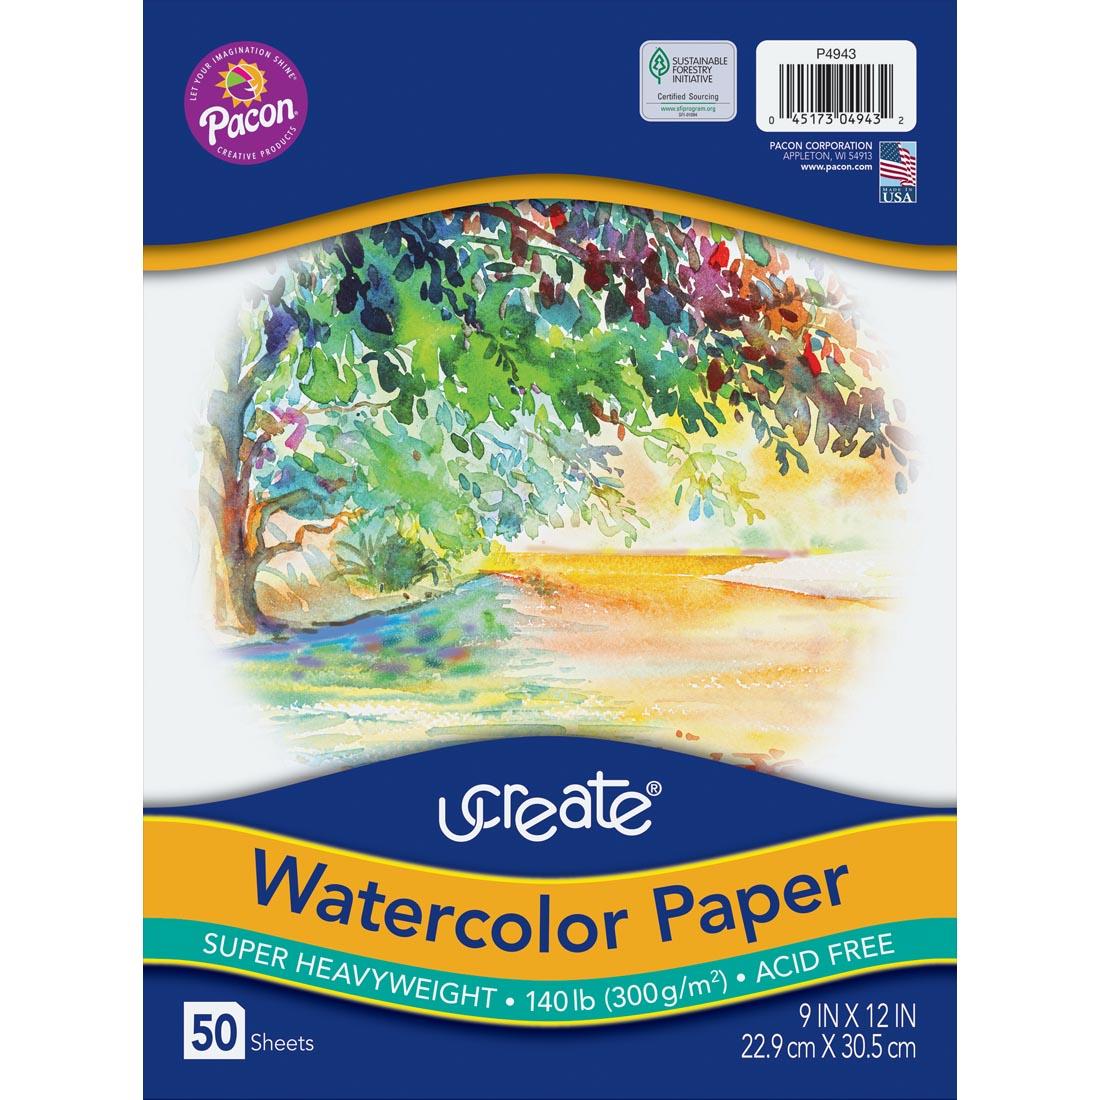 UCreate Super Heavyweight Watercolor Paper Pack